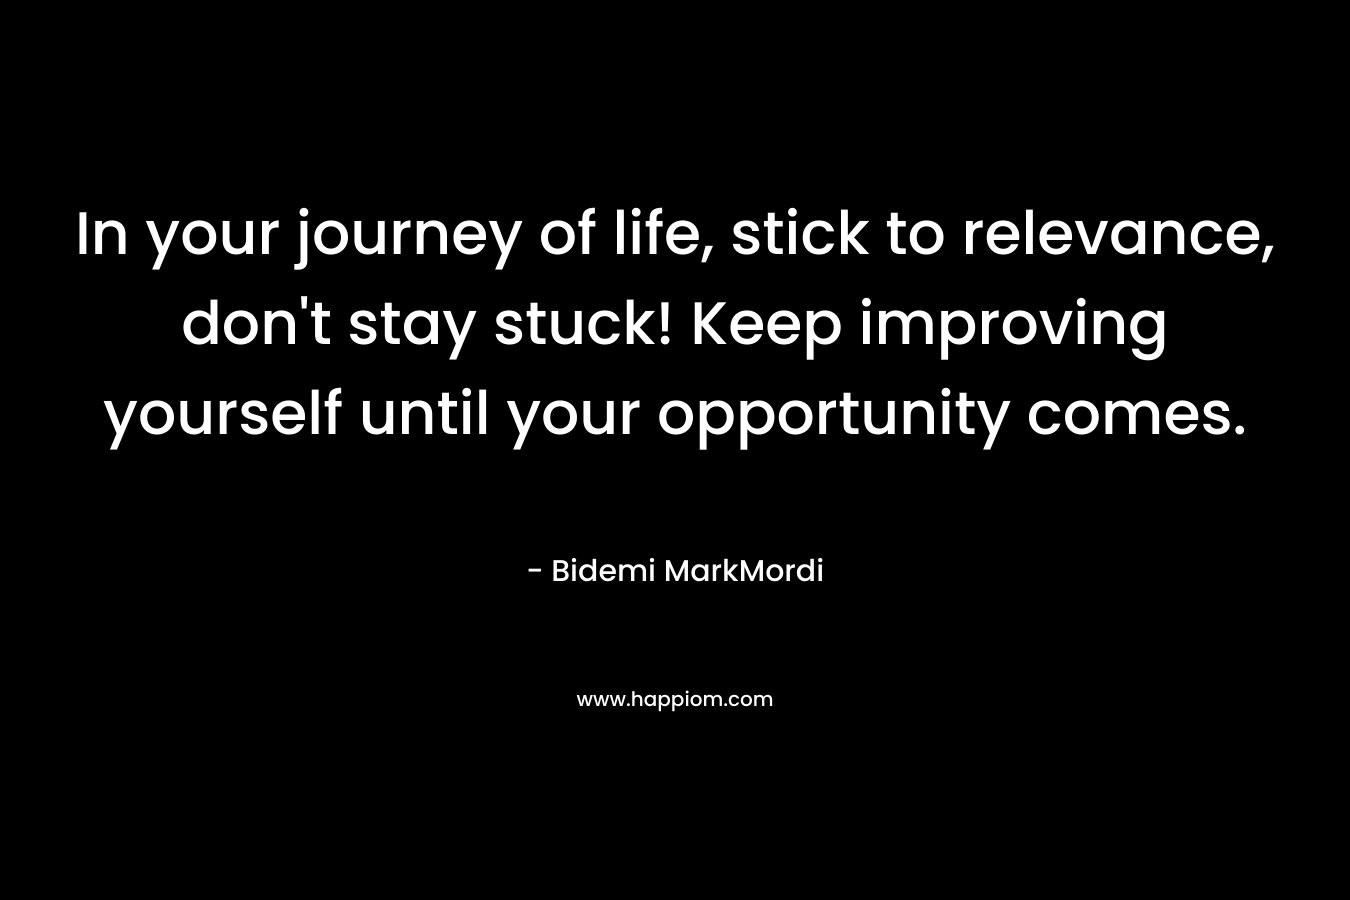 In your journey of life, stick to relevance, don’t stay stuck! Keep improving yourself until your opportunity comes. – Bidemi MarkMordi